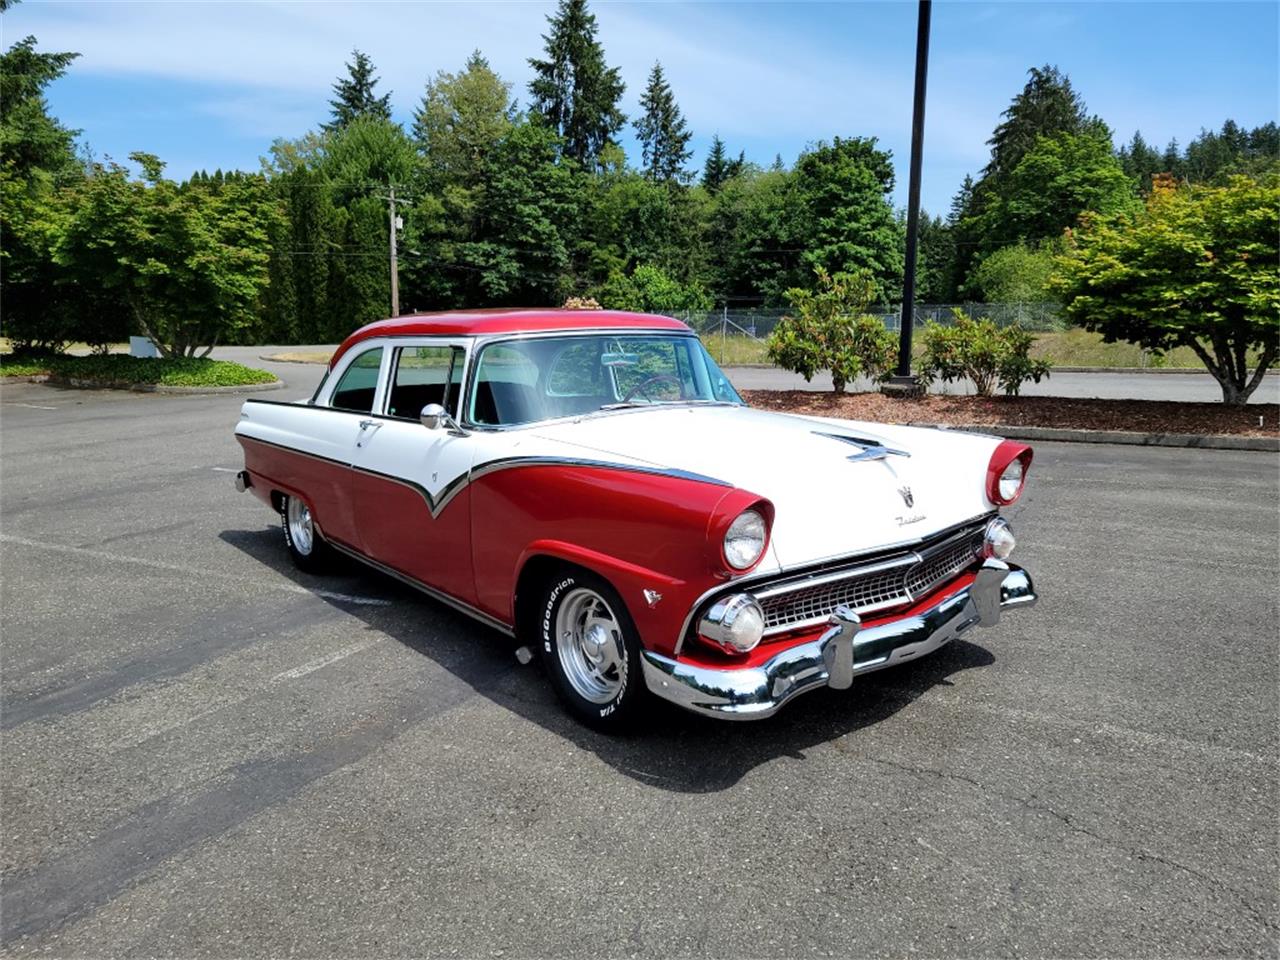 For Sale at Auction: 1955 Ford Fairlane in Seattle, Washington